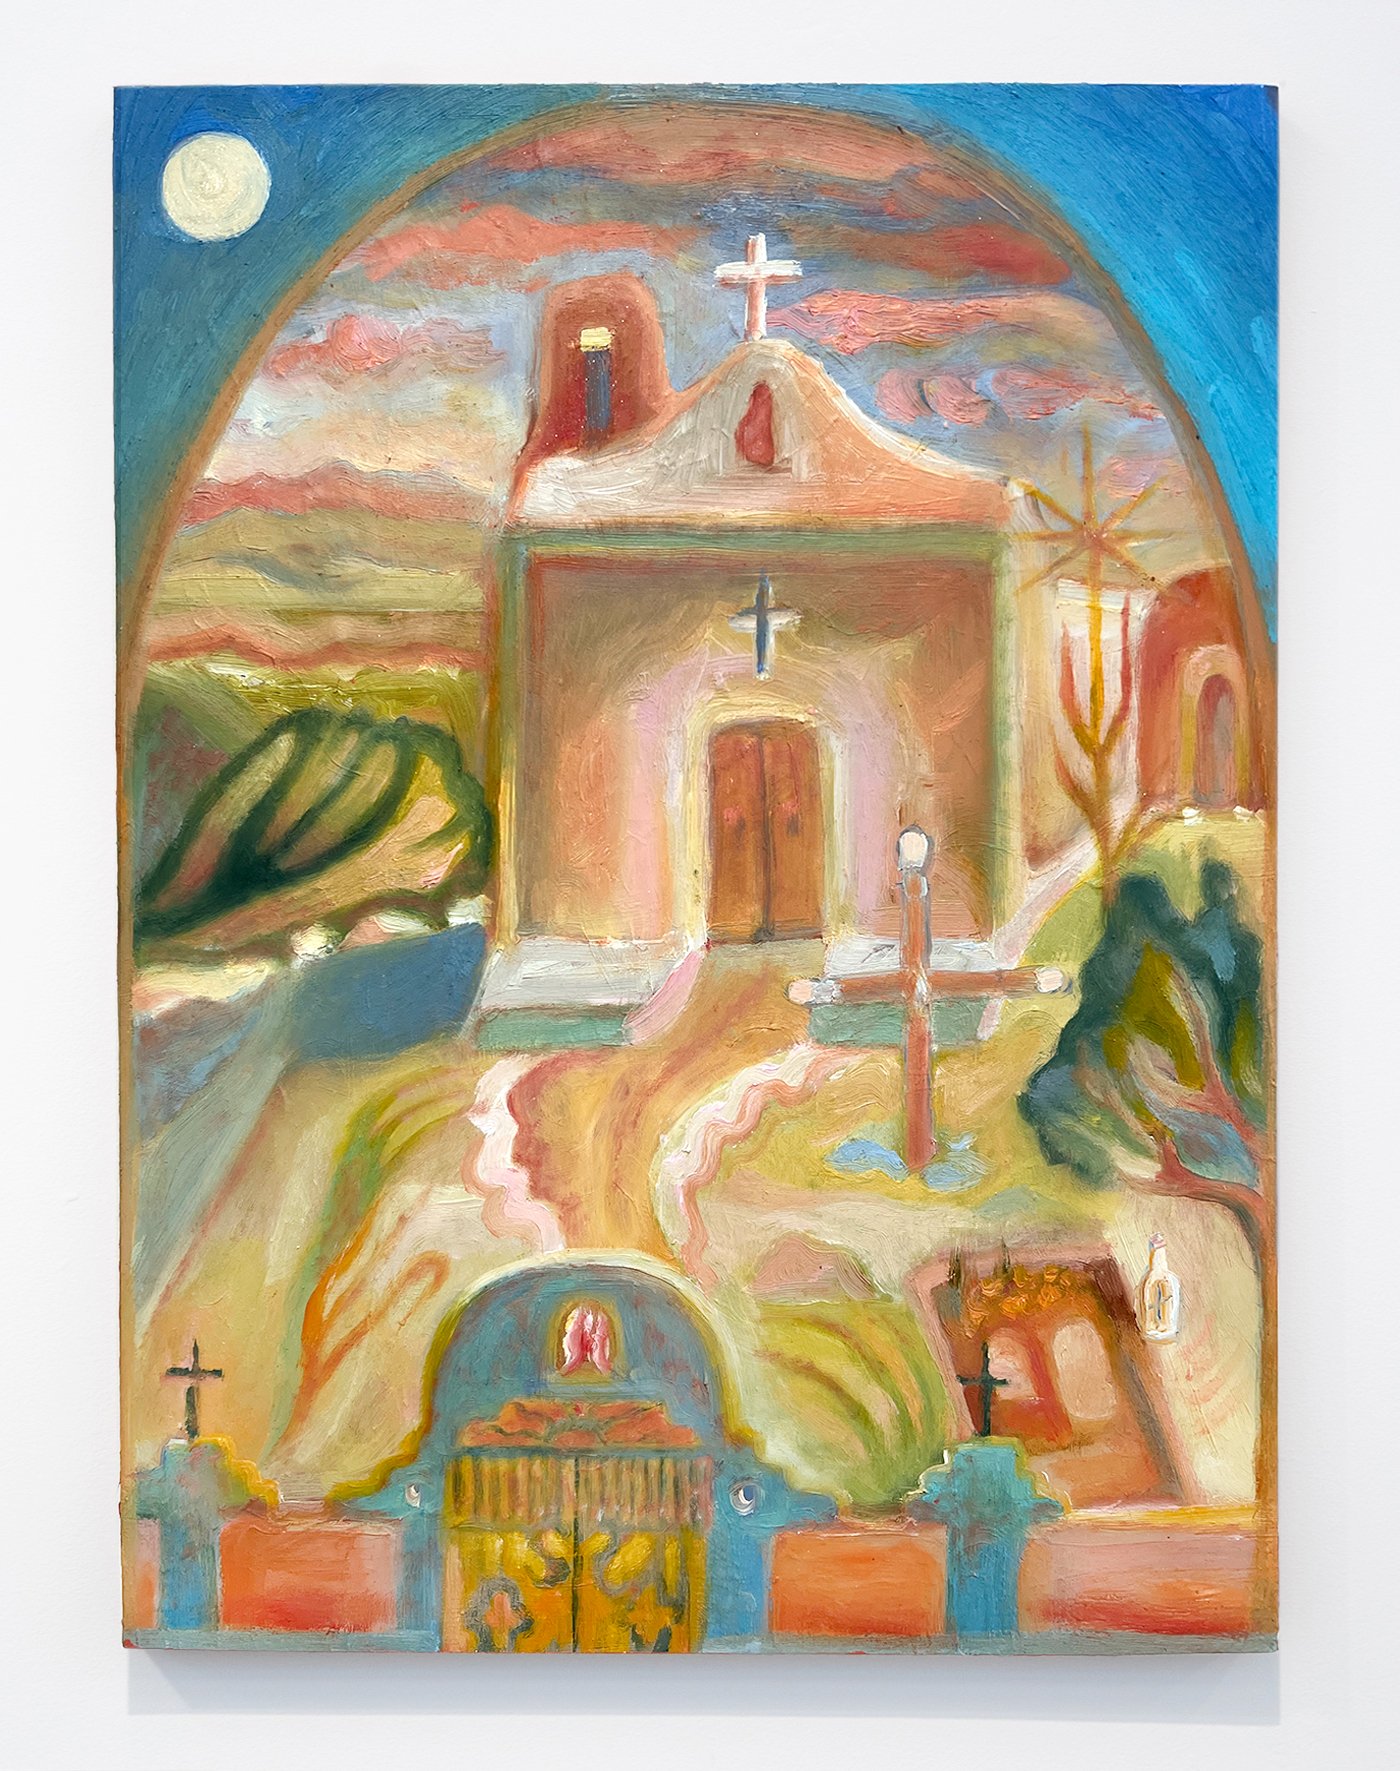 Morning Moon and the Church On The Hill_Oil, wax, mica on cradled panel, 16 x 12 inches, Margaret R Thompson_2023.jpg